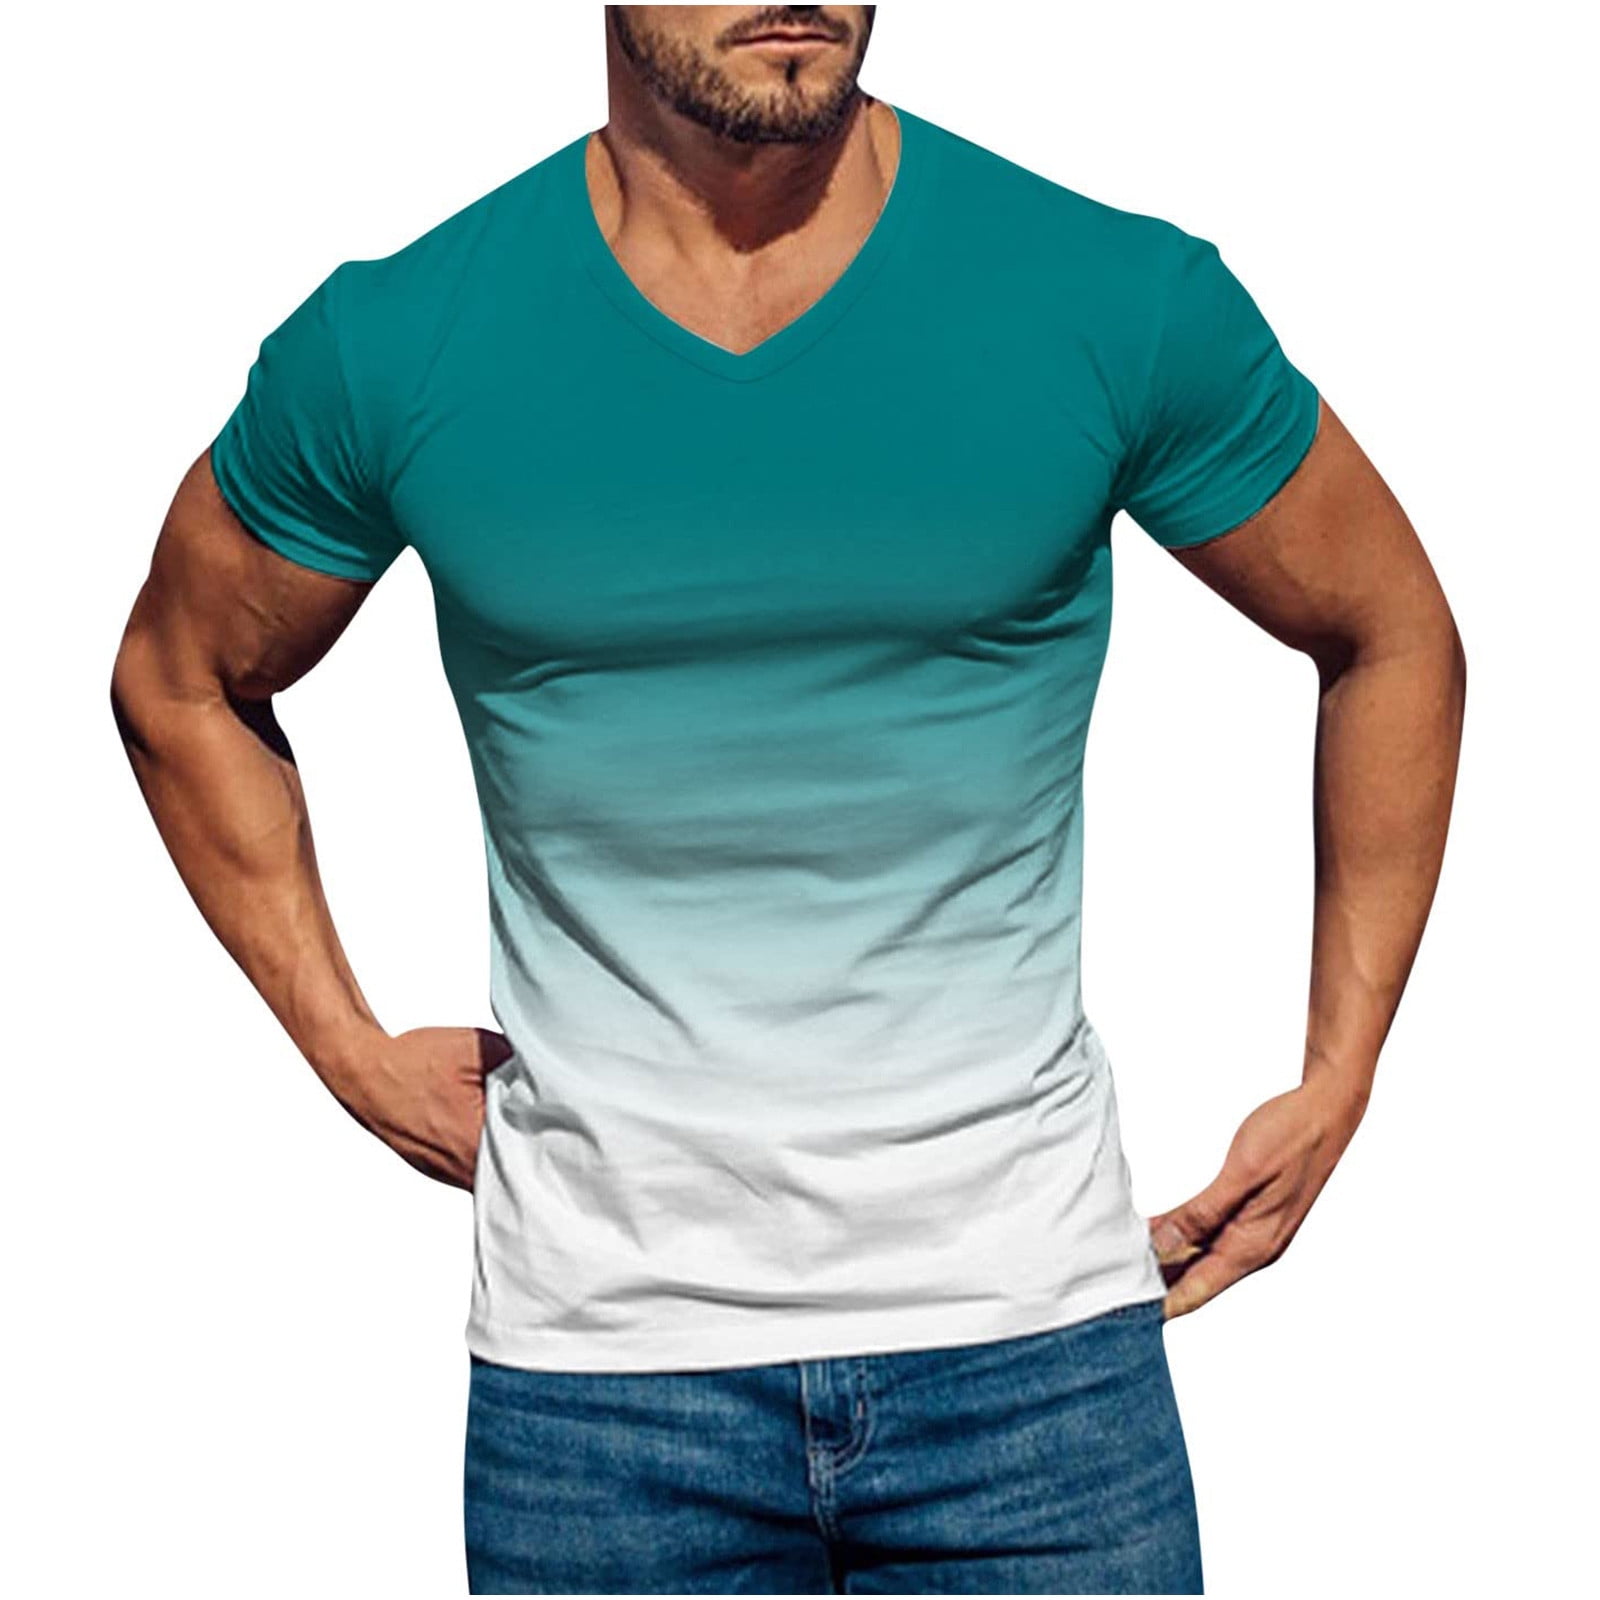 RYRJJ On Clearance Men's Muscle Workout Athletic V Neck T-Shirt  Bodybuilding Fashion Gradient Color Short Sleeve Slim Fit Tee Top Dark Gray  L 